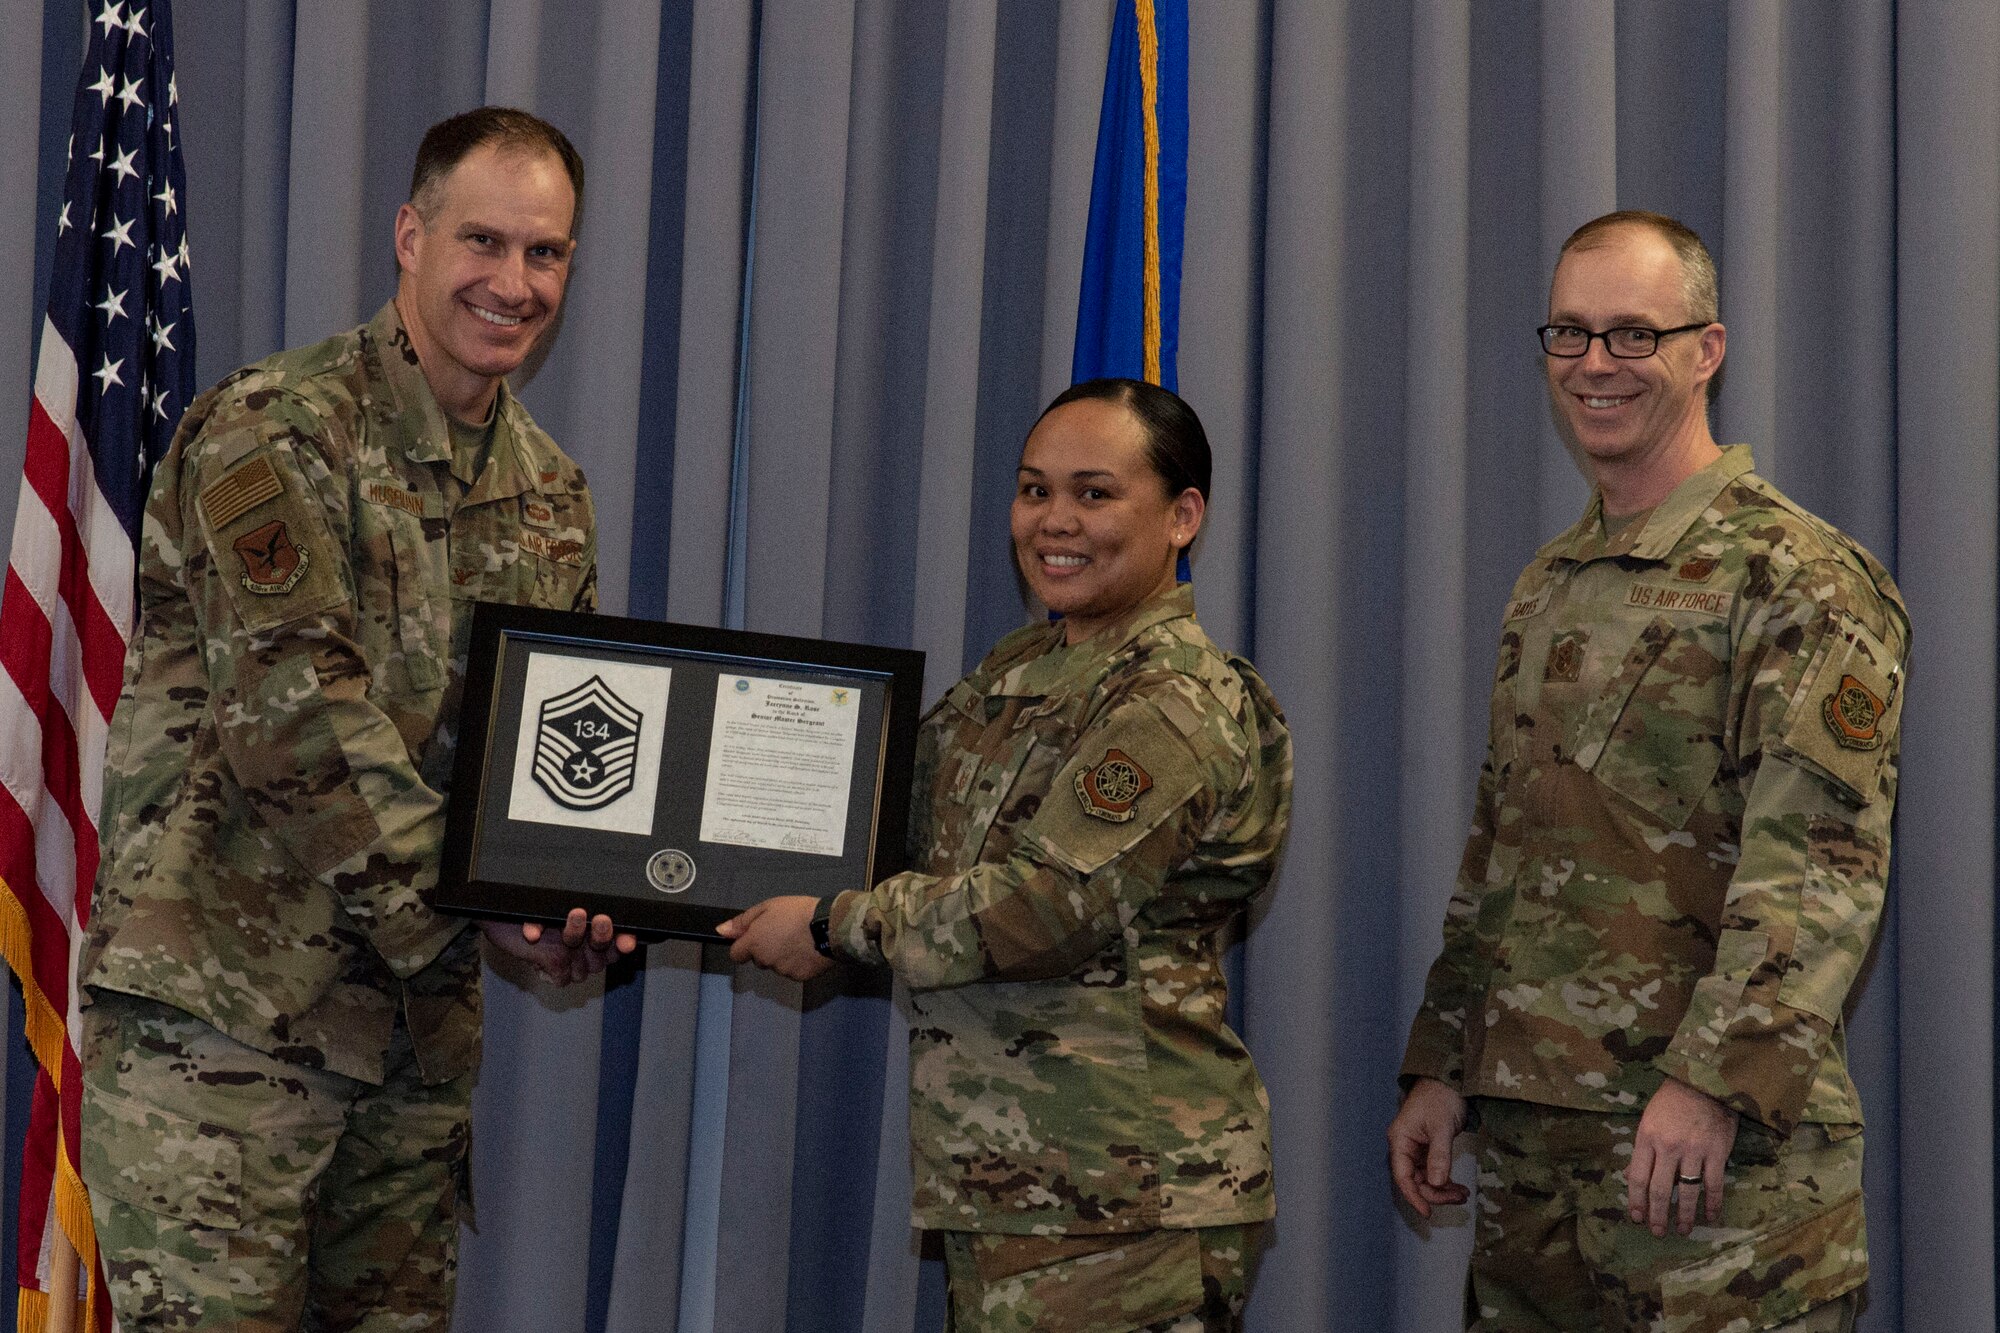 Master Sgt. Jaerynne Rose, center, 436th Operations Support Squadron weather flight chief, accepts her senior master sergeant promotion plaque from Col. Matt Husemann, left, 436th Airlift Wing commander, and Chief Master Sgt. Timothy Bayes, 436th AW command chief, during the senior master sergeant promotion release party at Dover Air Force Base, Delaware, March 18, 2022. Rose was one of seven master sergeants at Dover AFB selected for promotion to senior master sergeant in the 22E8 promotion cycle. (U.S. Air Force photo by Roland Balik)